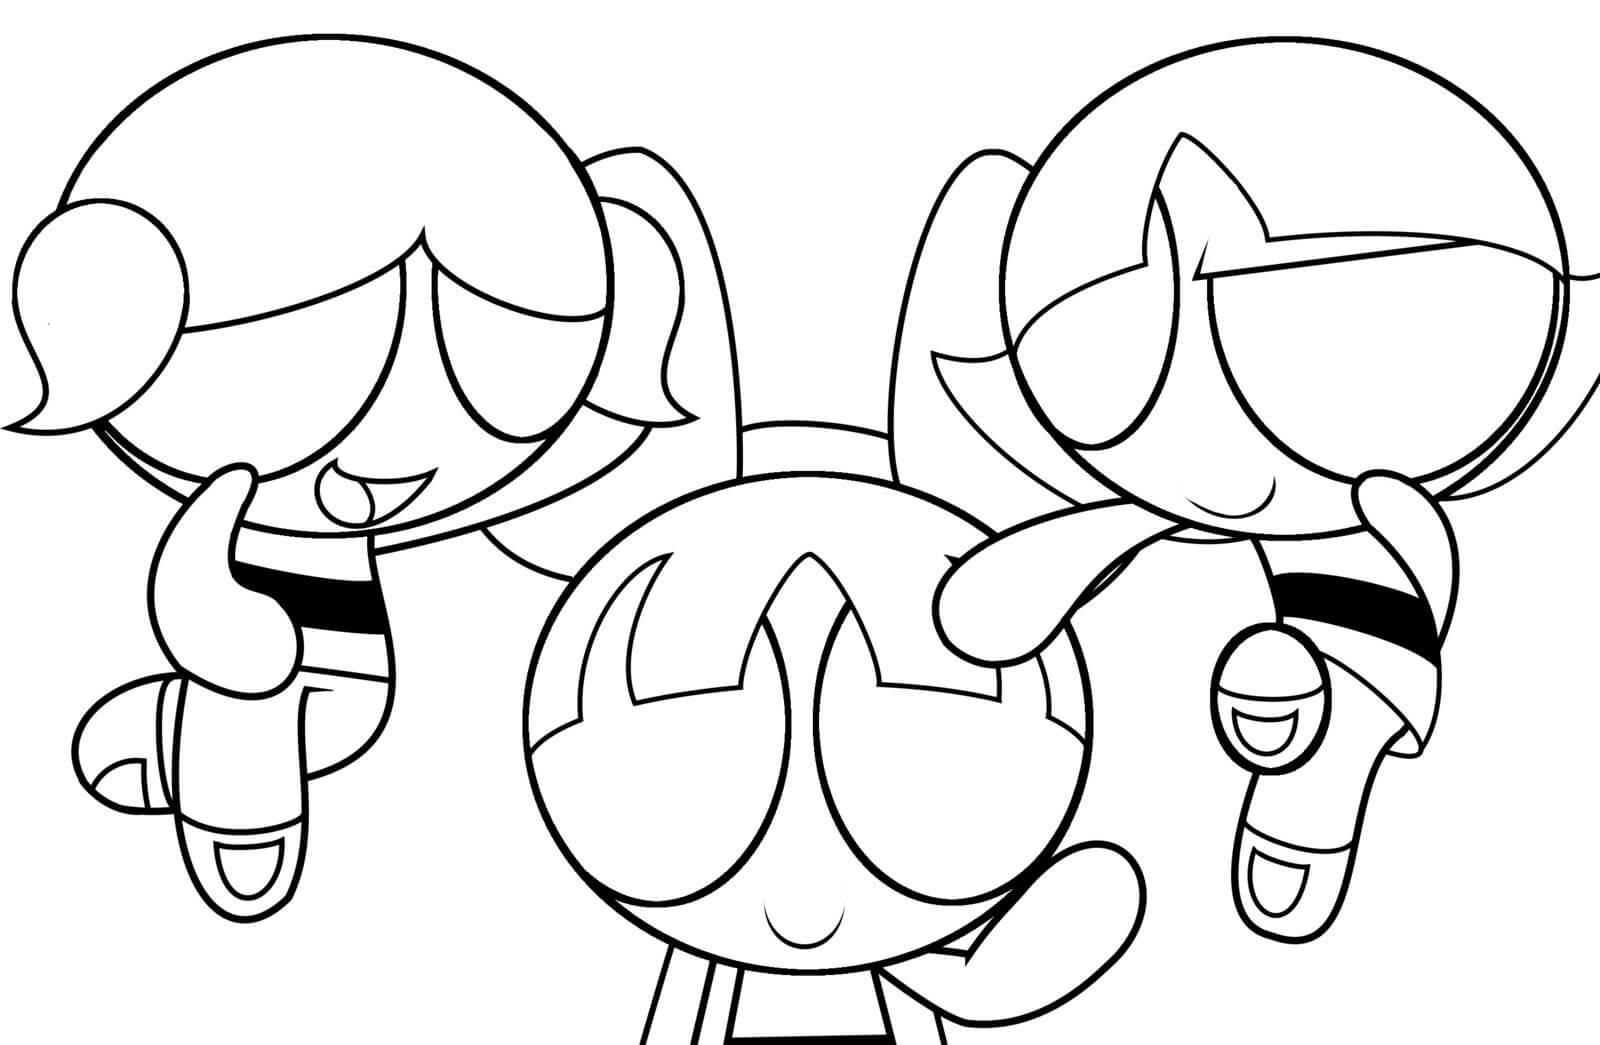 Finish the Powerpuff Girl Coloring Page